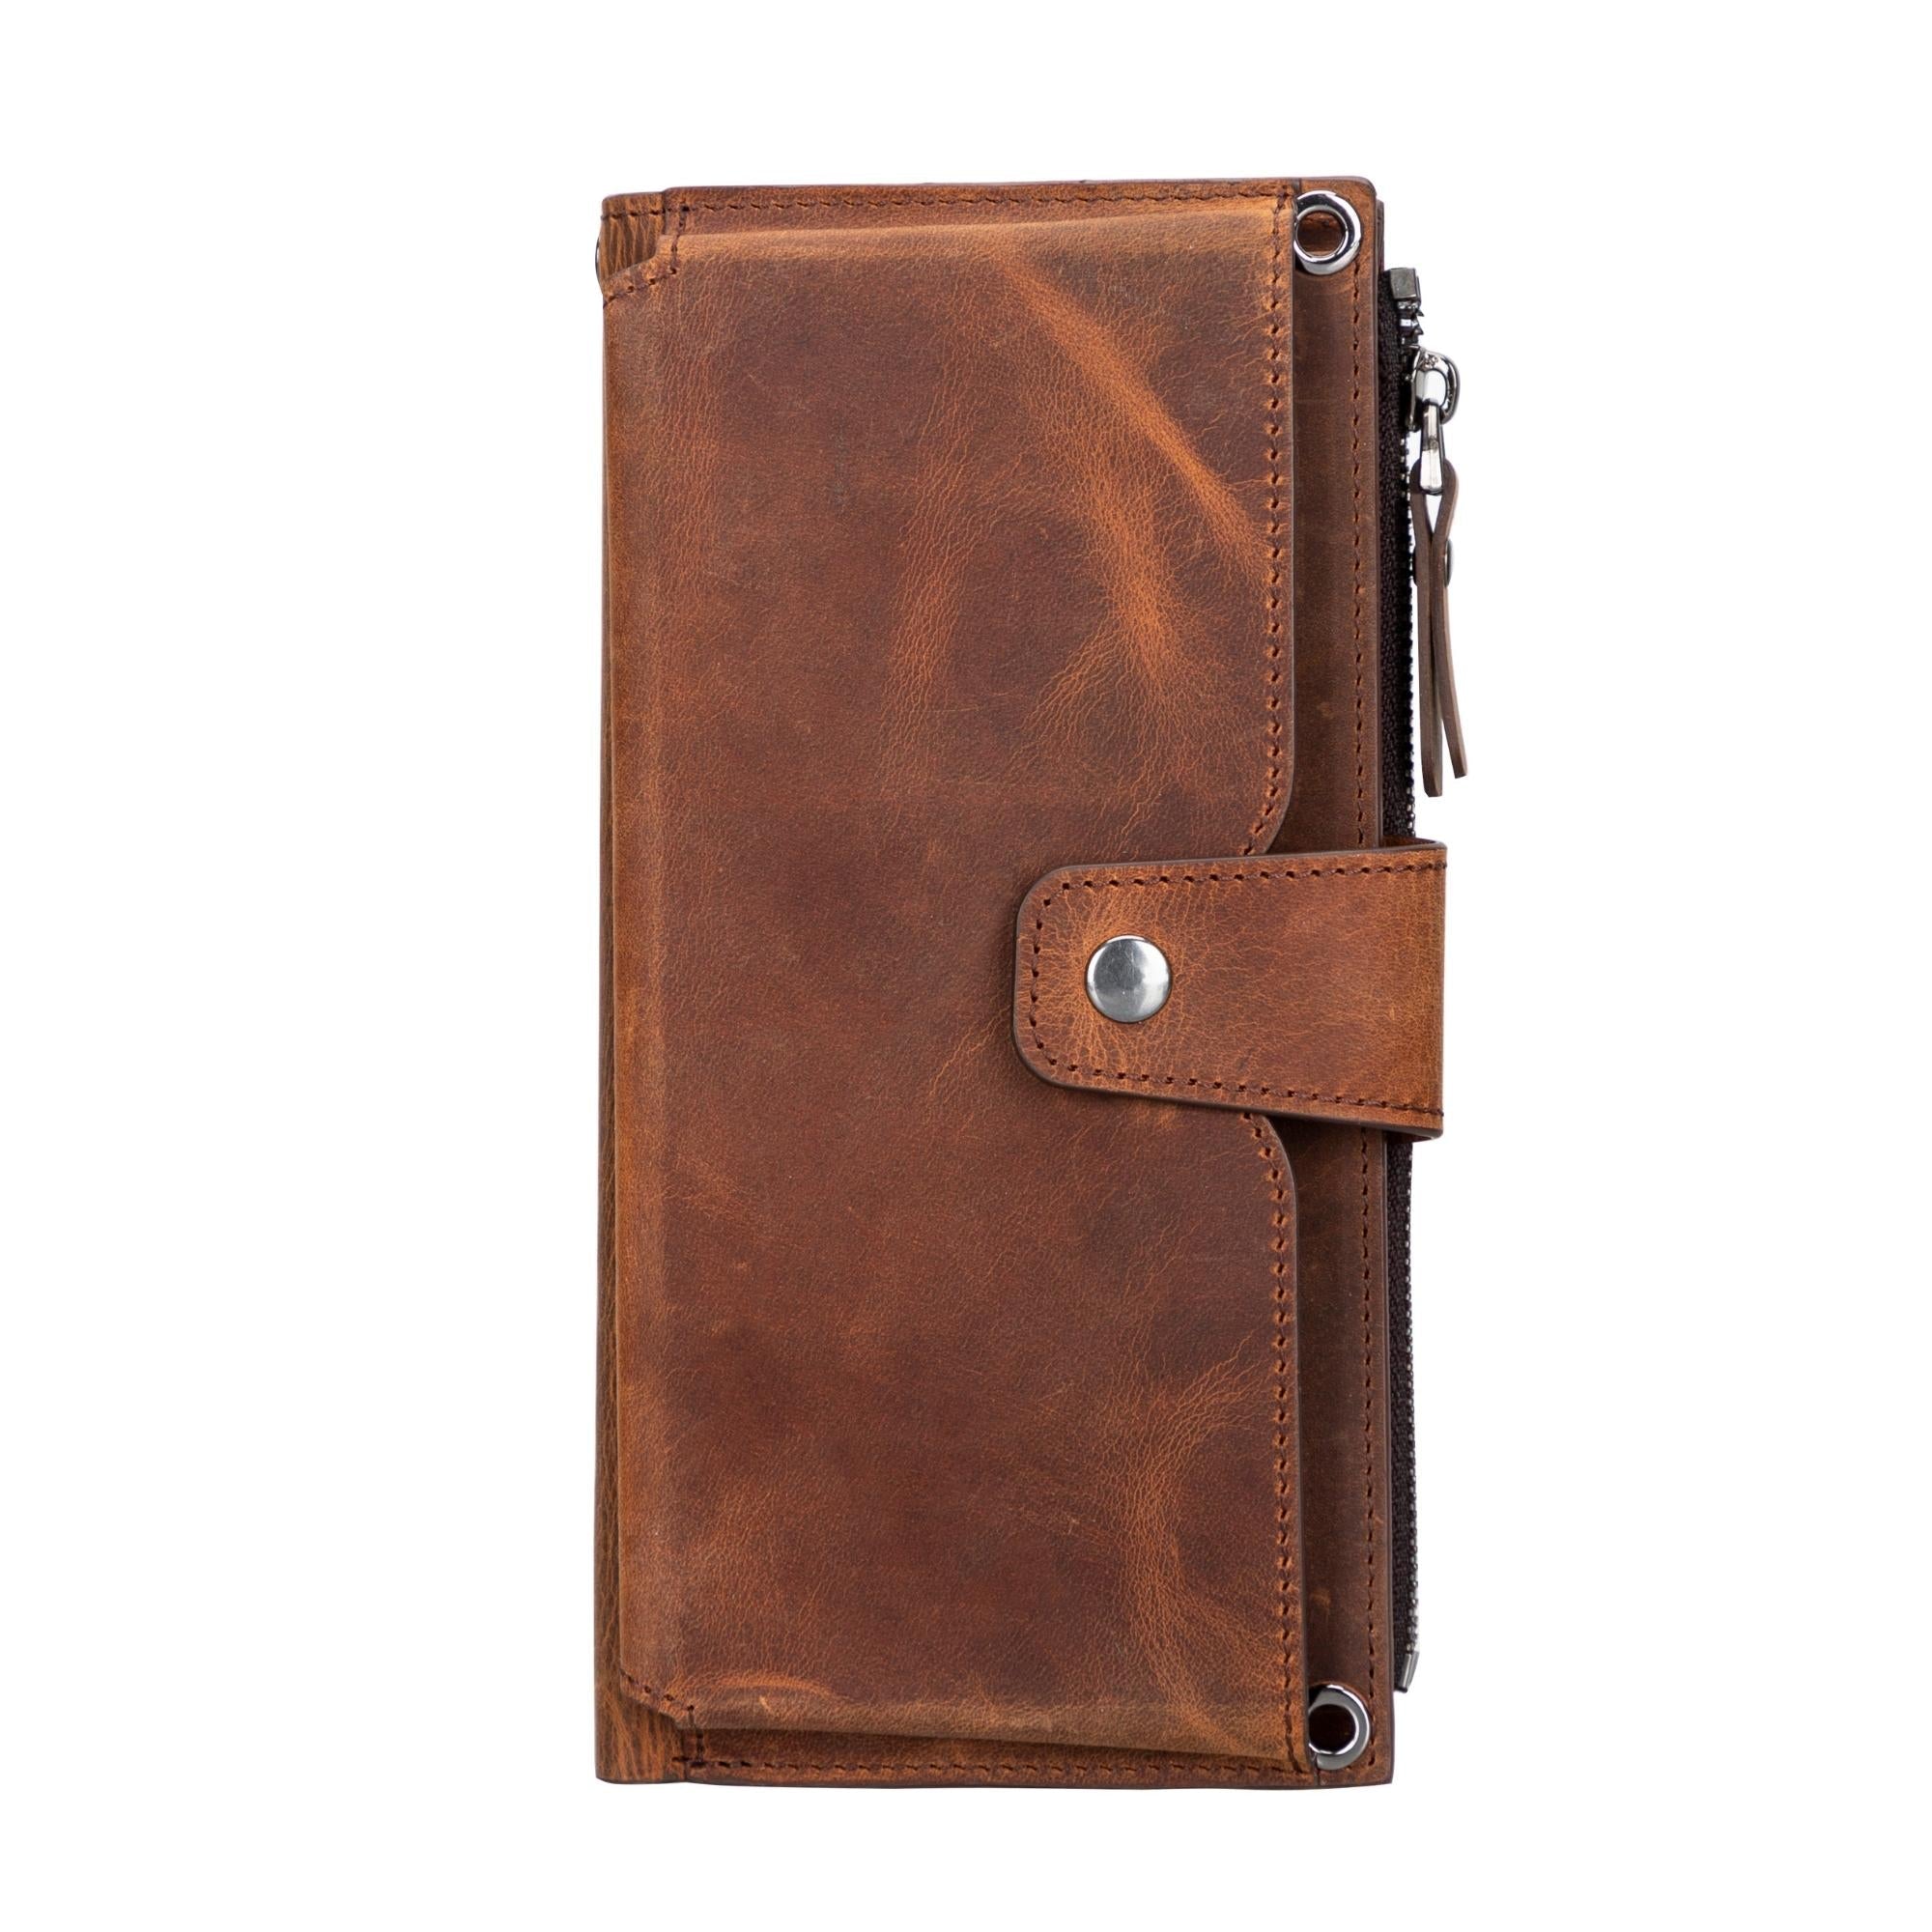 Kaycee Leather Women's Cell Phone Wallet with Strap - Antic Brown - 6.9" - TORONATA